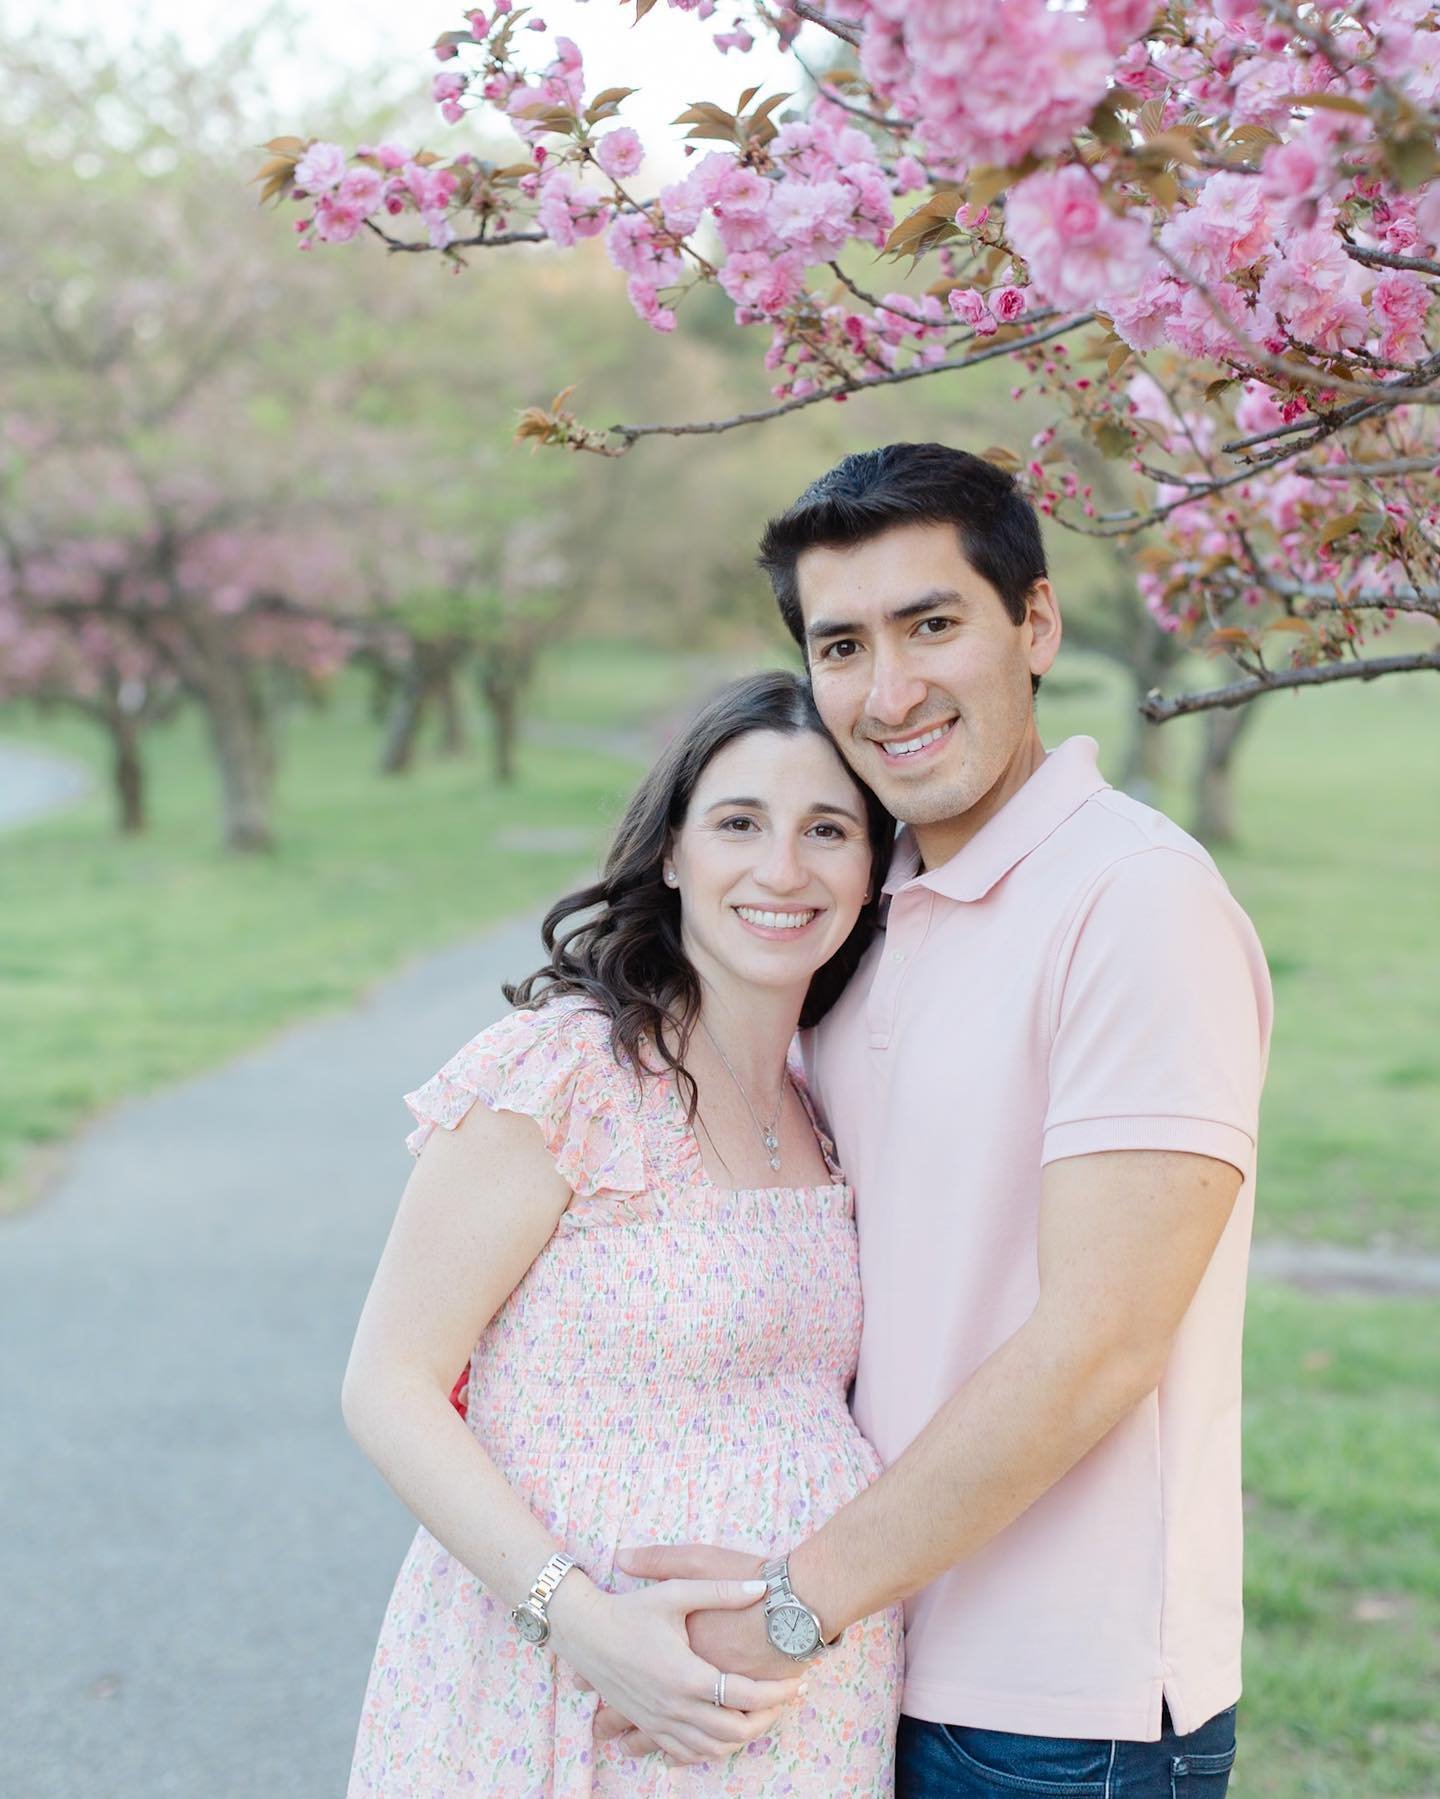 April in NJ likes to keep us on our toes, but few things bring me more joy than those first spring blooms after a long winter. I&rsquo;m so glad the cherry blossoms showed up for this special maternity session. 🤍
.
.
.
.
.
#njphotographer #njfamilyp